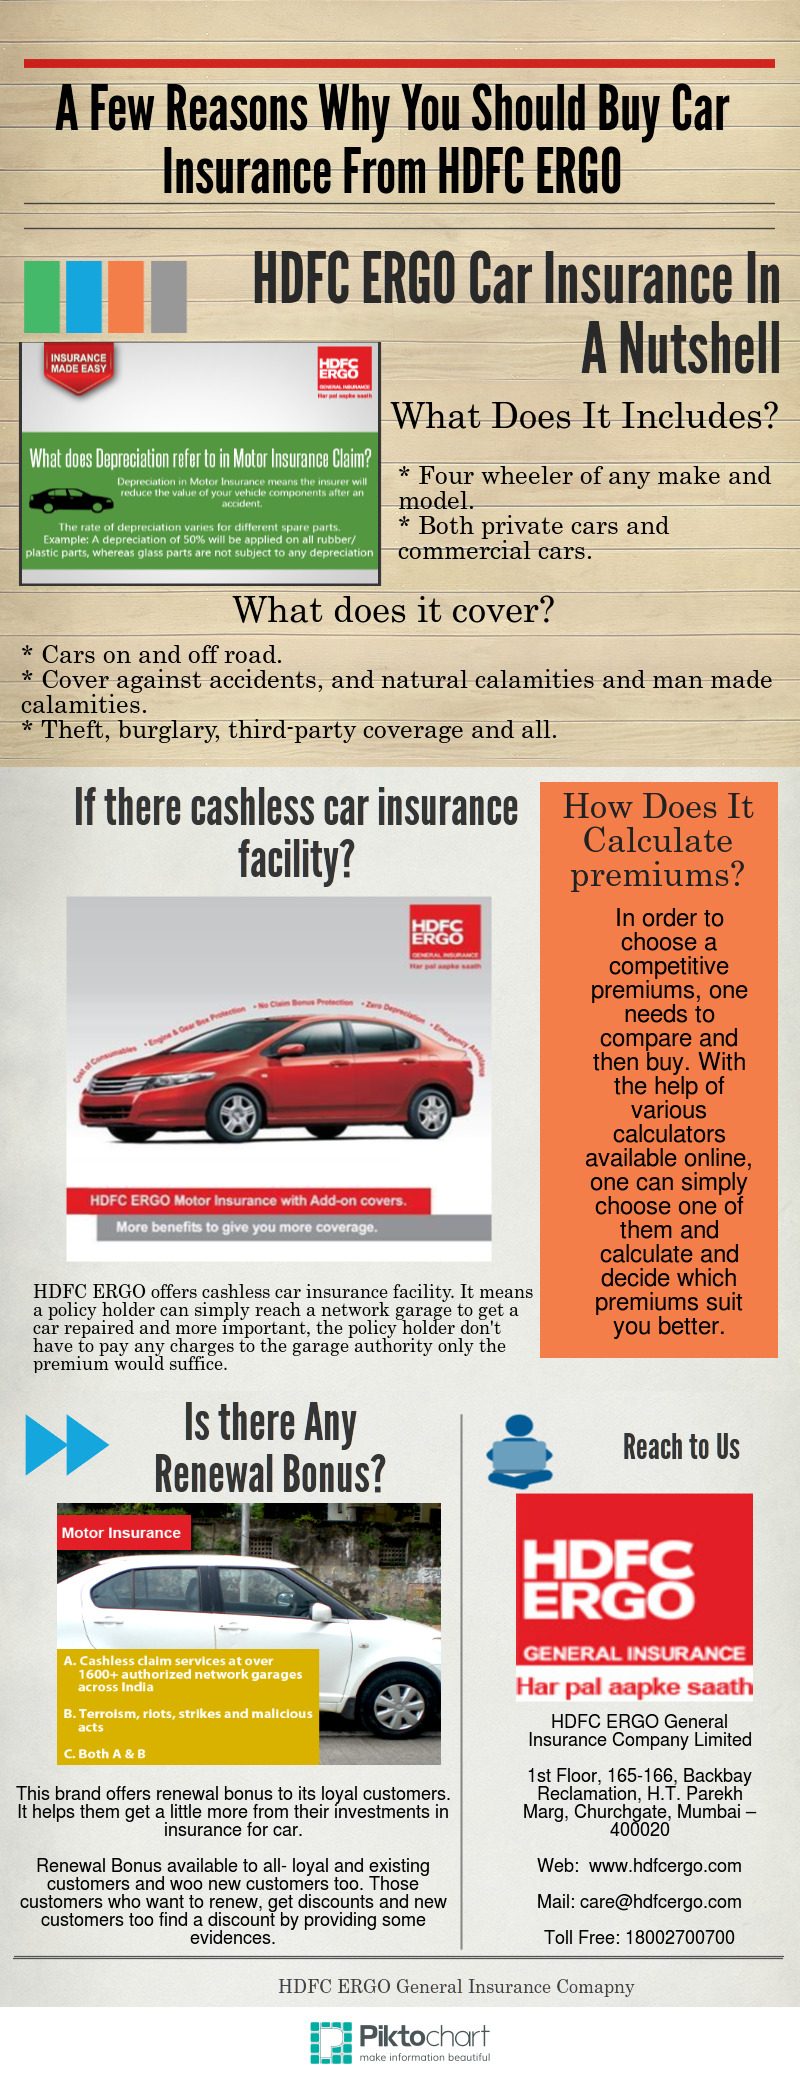 A Few Reasons Why You Should Buy Car Insurance From HDFC ERGO Visual.ly